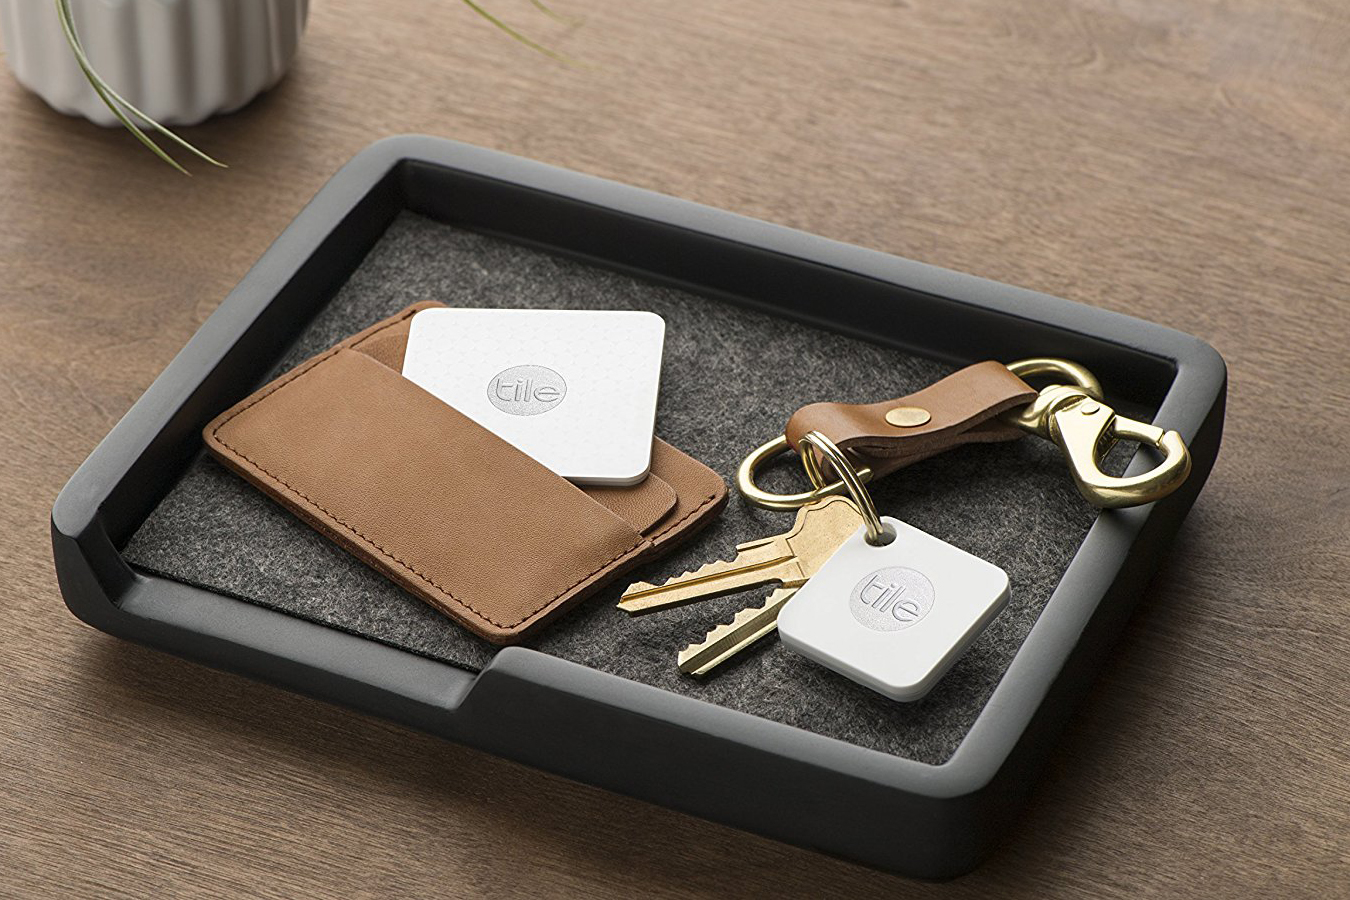 Tile trackers' new anti-theft mode makes life difficult for thieves